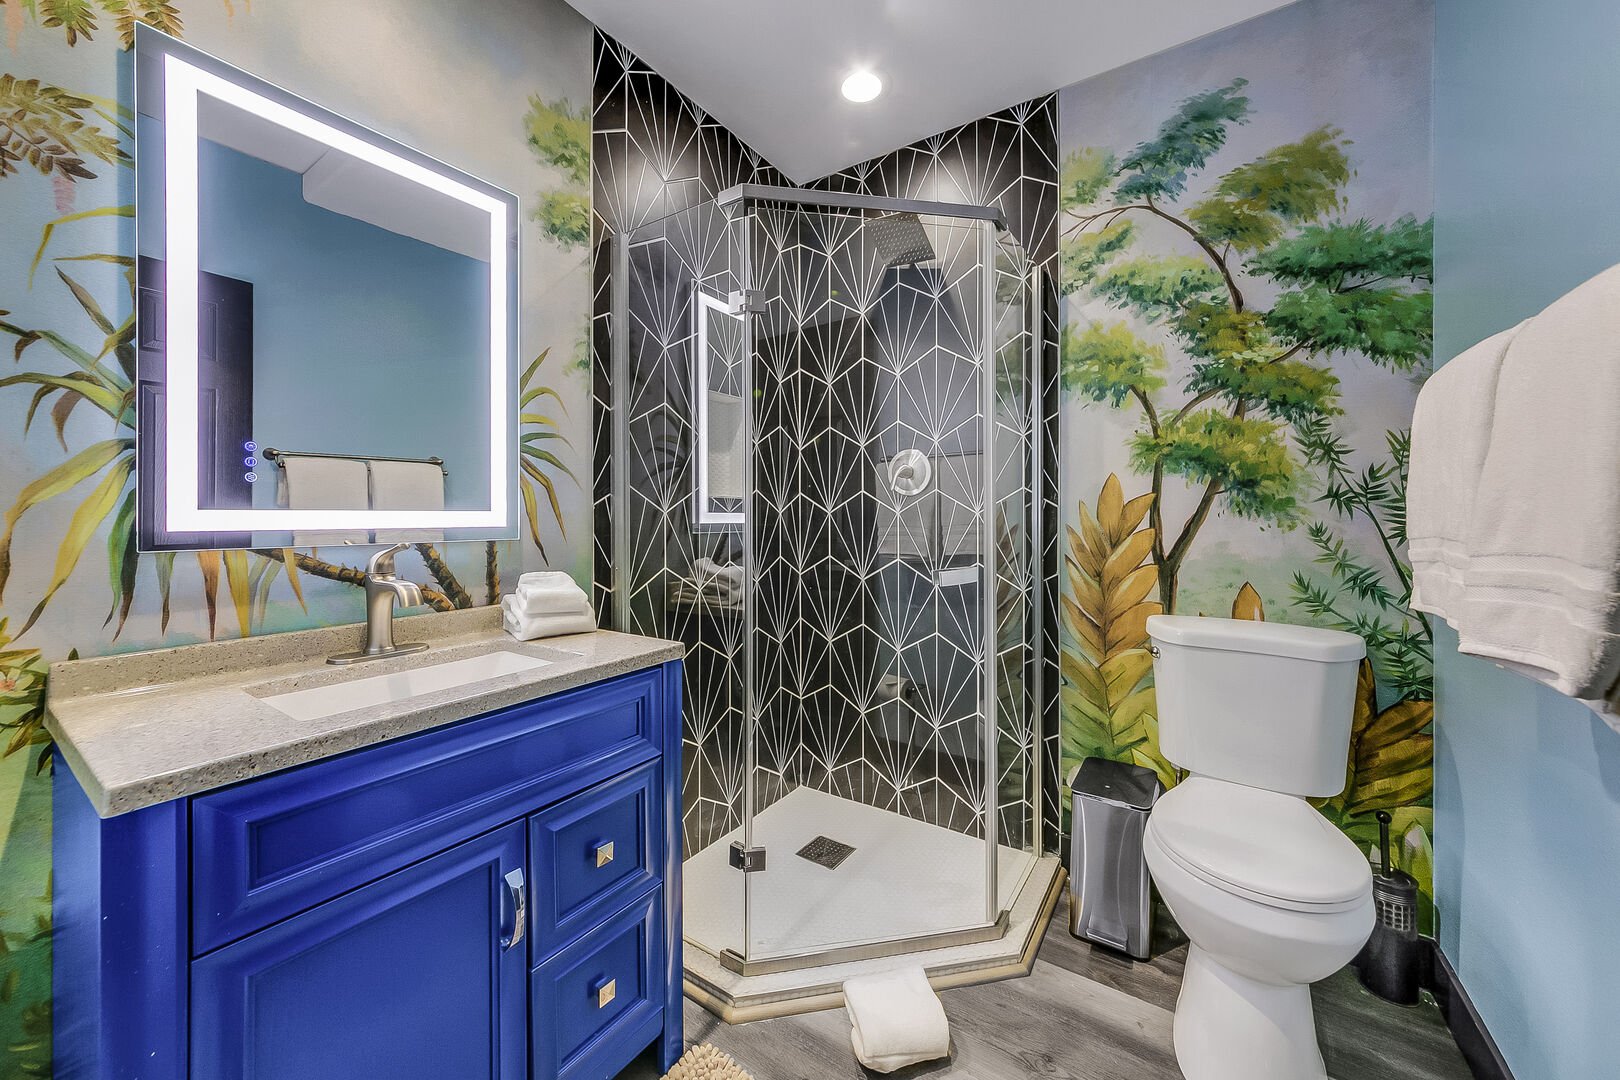 The private, en suite bathroom features a tile shower and a decorative vanity sink.